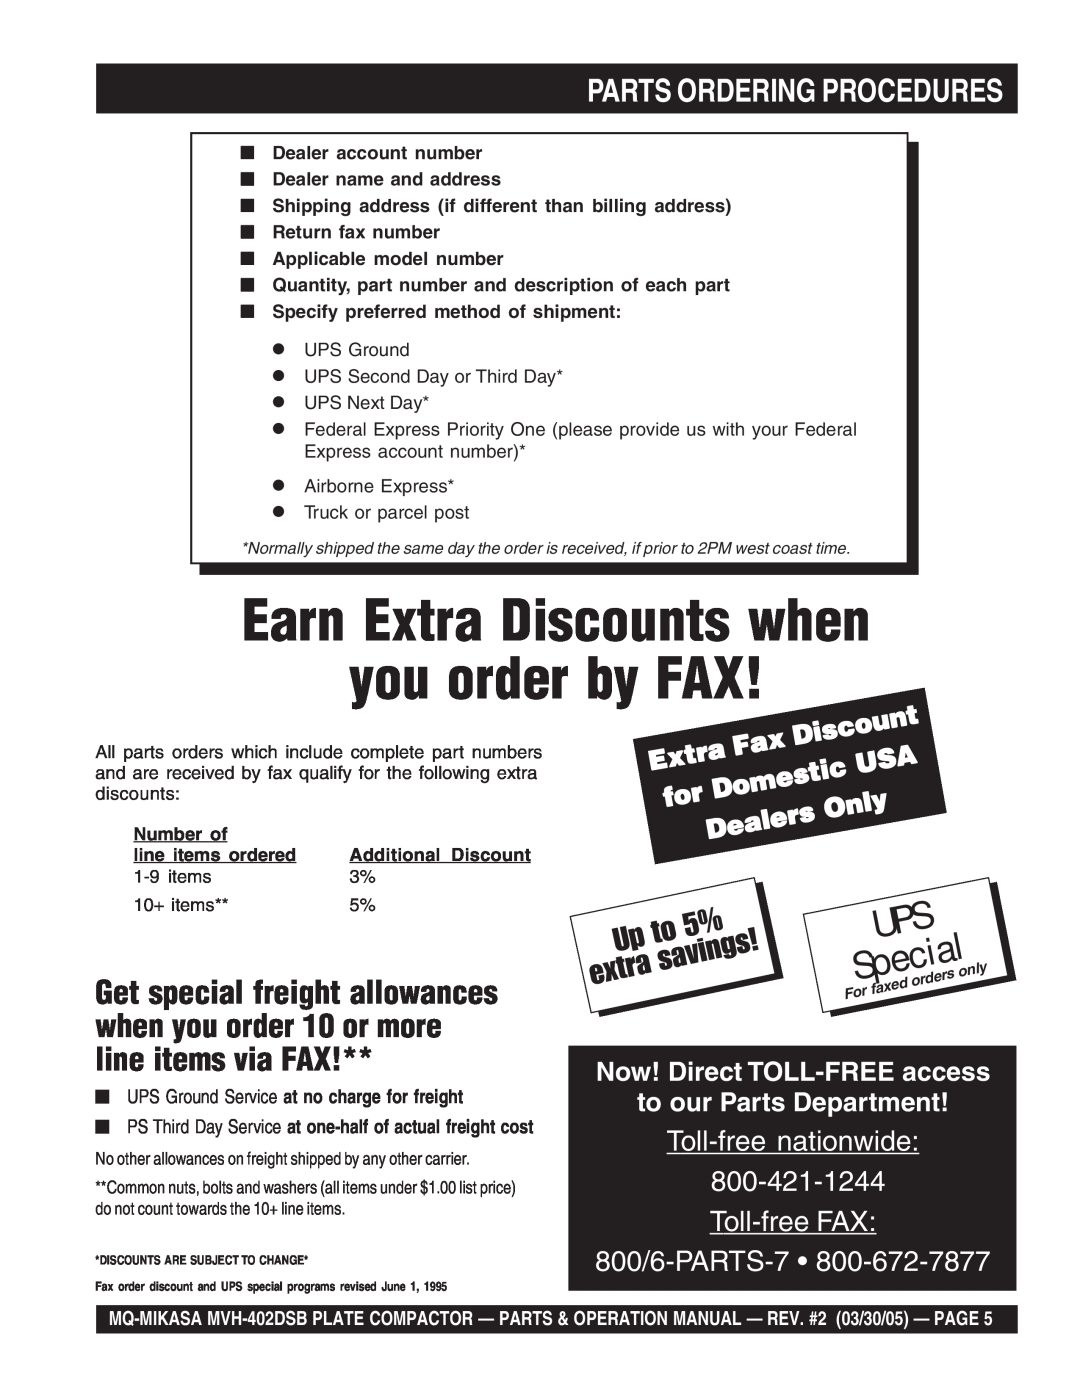 Multiquip MVH-402DSB Parts Ordering Procedures, Earn Extra Discounts when you order by FAX, Special, 800/6-PARTS-7, Only 